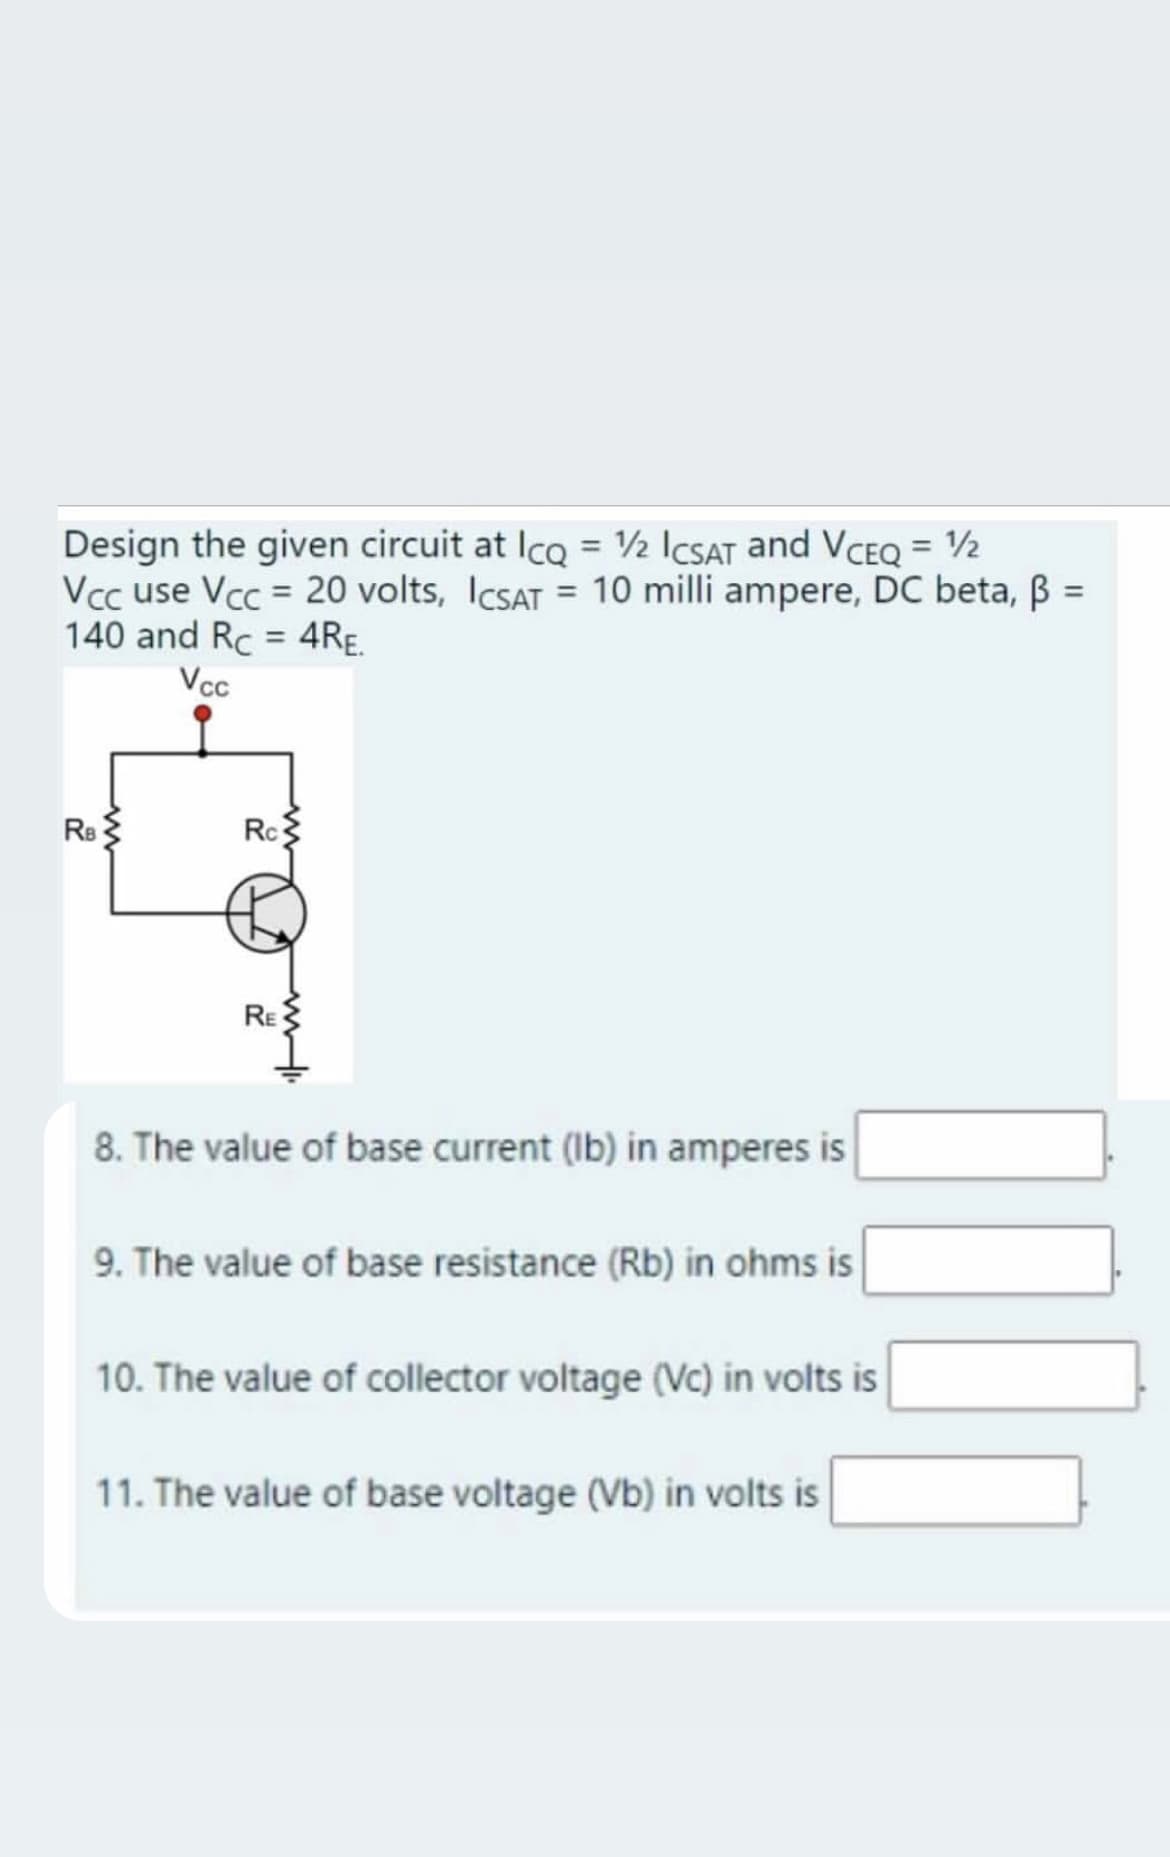 Design the given circuit at Ico = 2 ICSAT and VCEQ = ½
Vcc use Vcc = 20 volts, ICSAT = 10 milli ampere, DC beta, B =
140 and Rc = 4RE.
Vcc
Rs
Rc
RE
8. The value of base current (Ib) in amperes is
9. The value of base resistance (Rb) in ohms is
10. The value of collector voltage (Vc) in volts is
11. The value of base voltage (Vb) in volts is
